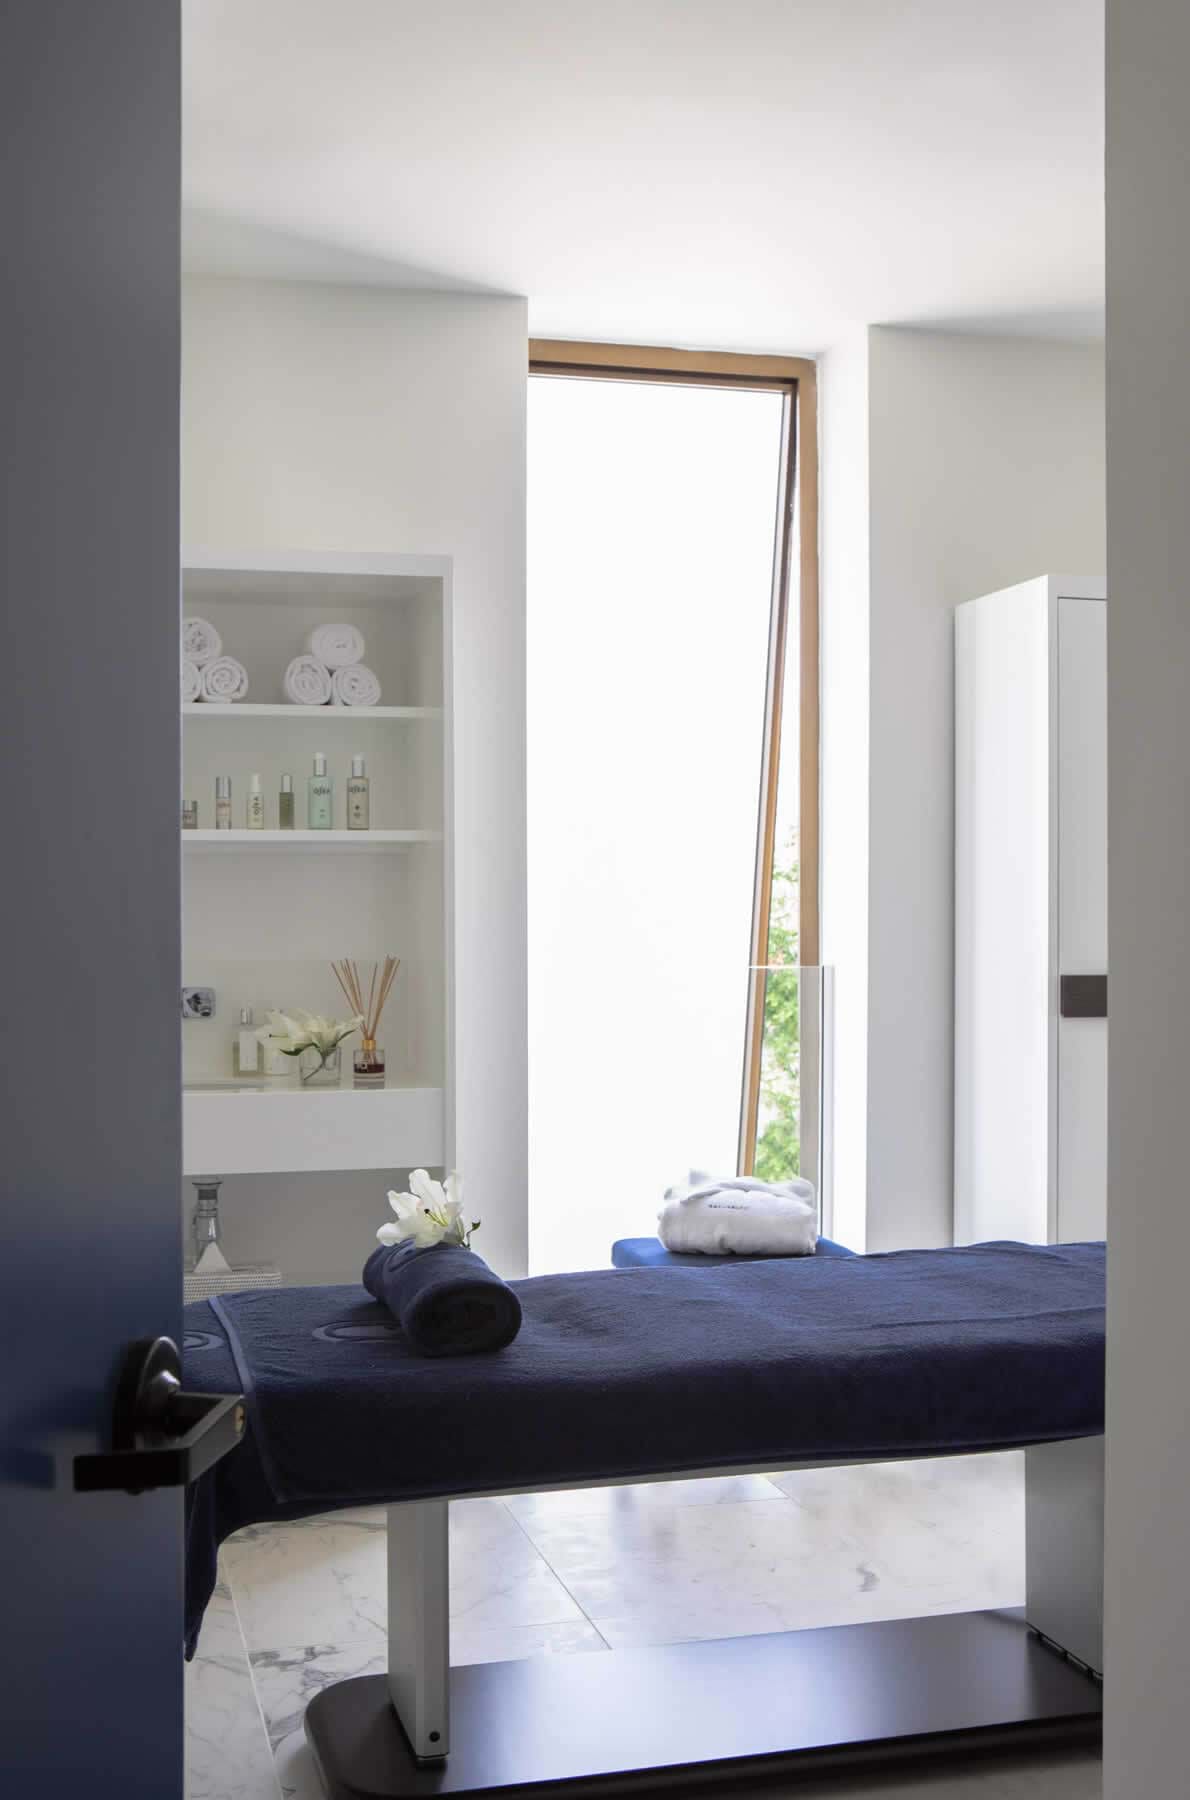 Annabelle Hotel - Ouranos Wellbeing Spa - Treatment Room